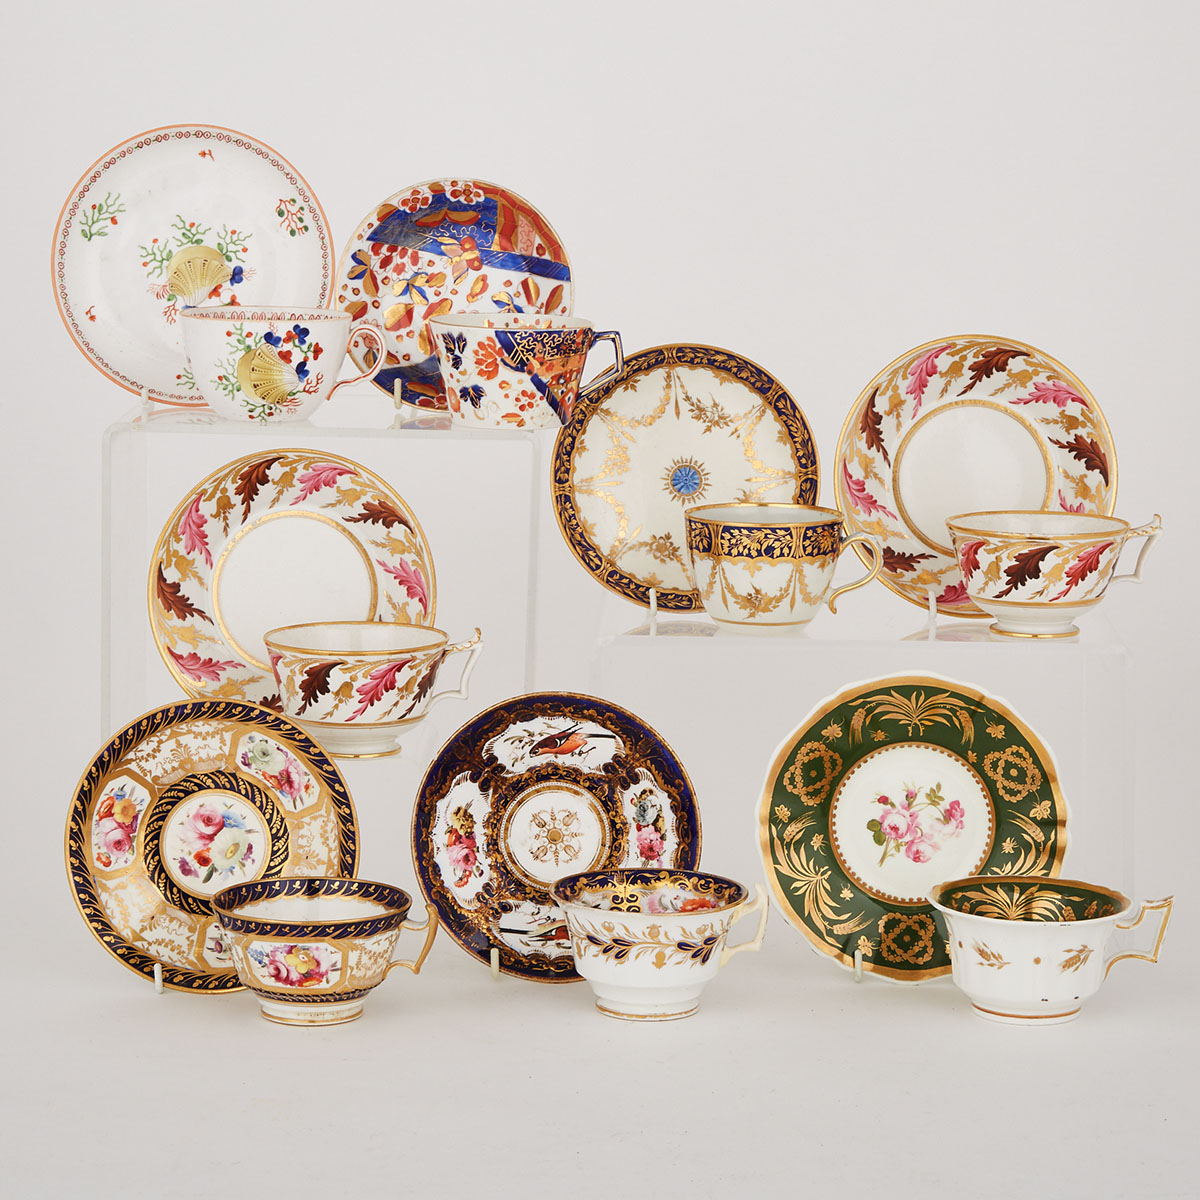 Eight Various English Porcelain Cups and Saucers, 19th century